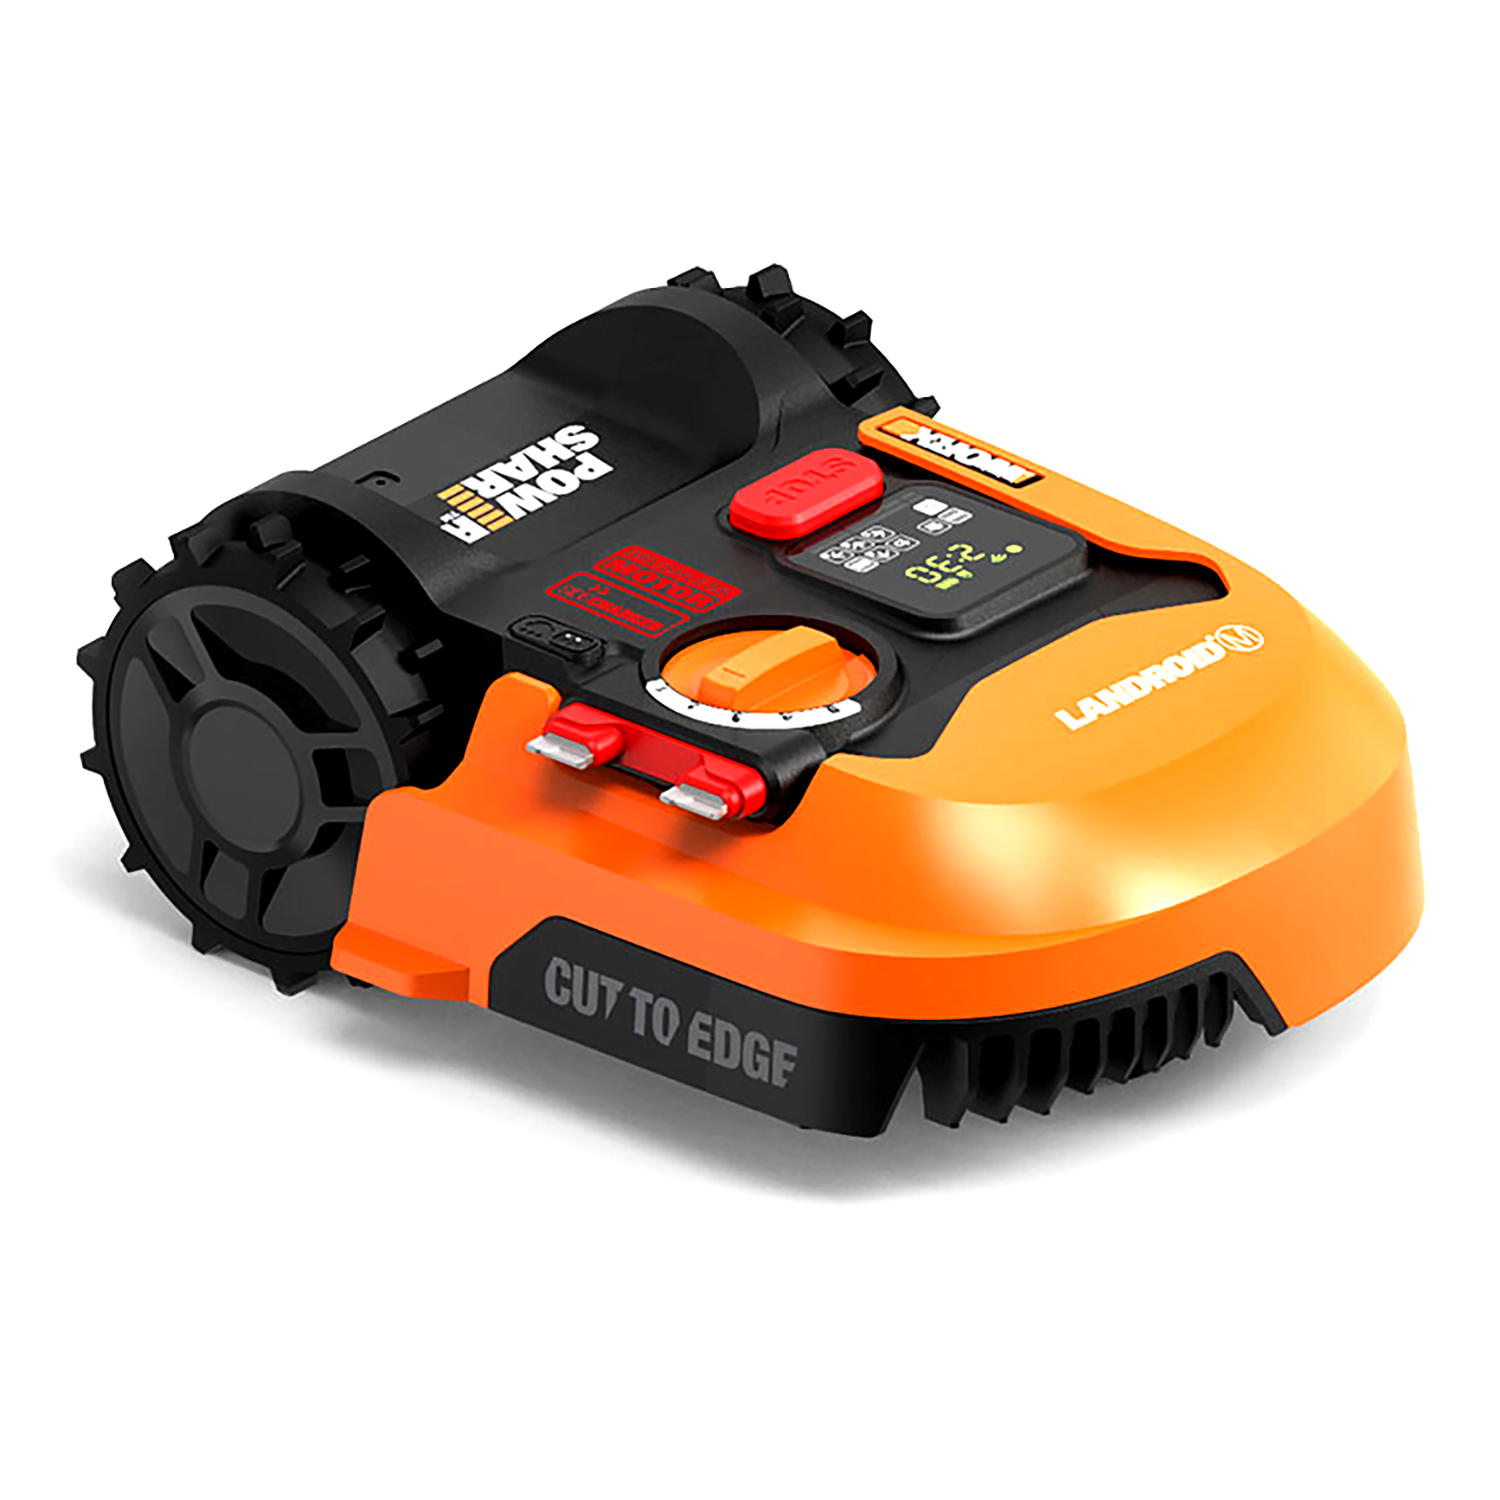 WORX Landroid M with ¼ acre Cordless Robotic Lawnmower + Garage Accessory